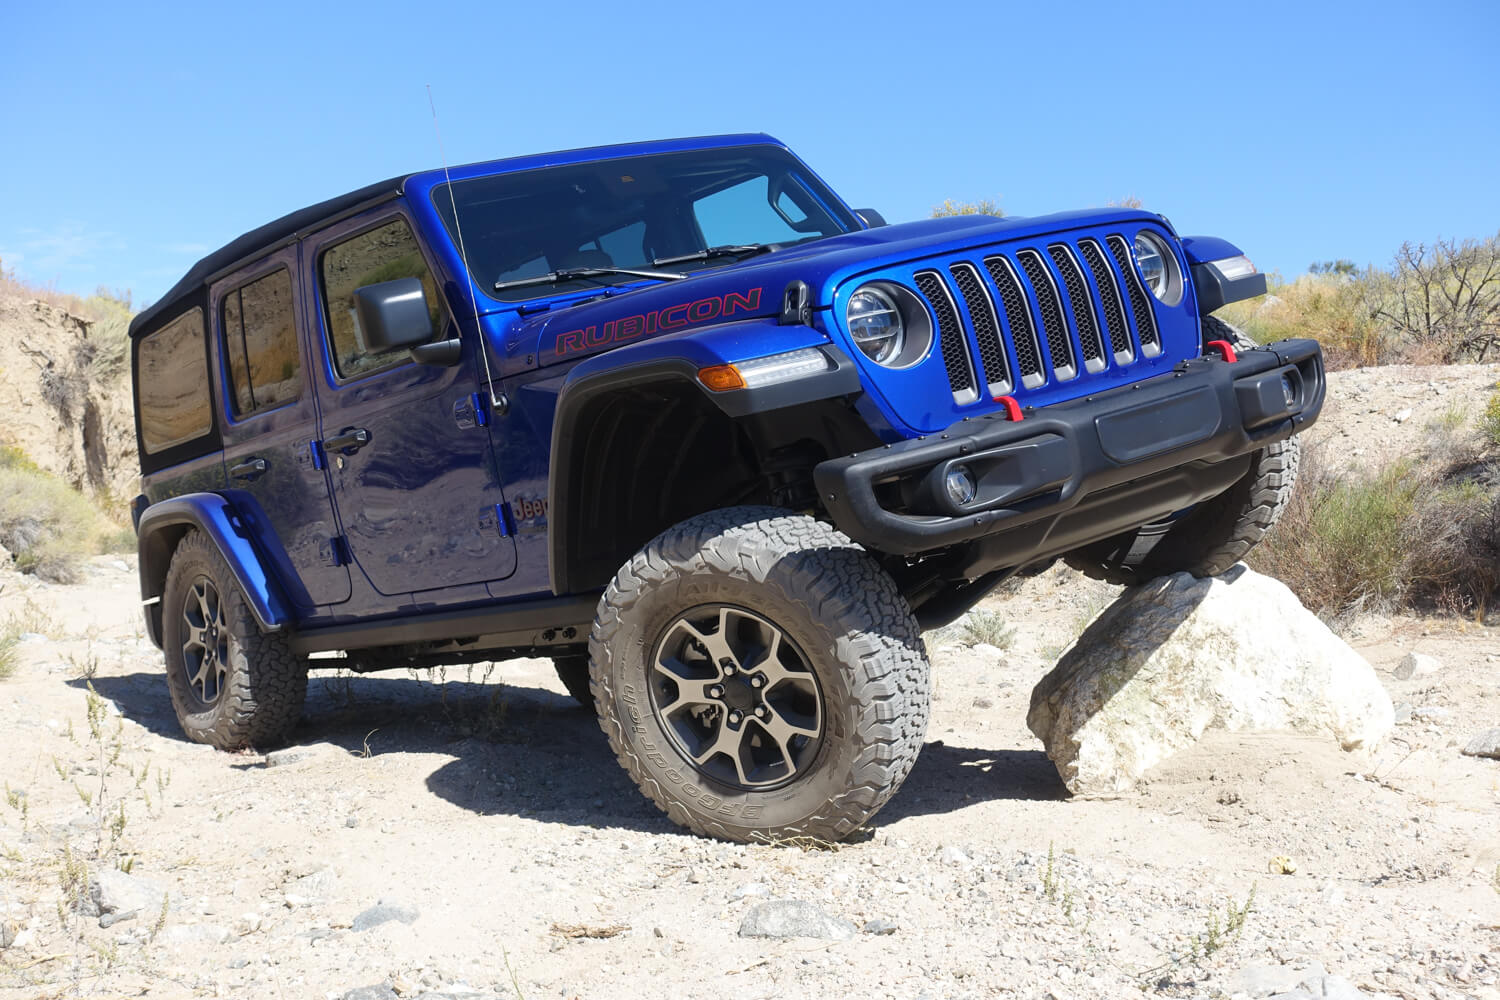 Jeep Wrangler JL Four Cylinder Turbo Versus V6 - The Dirt by 4WP